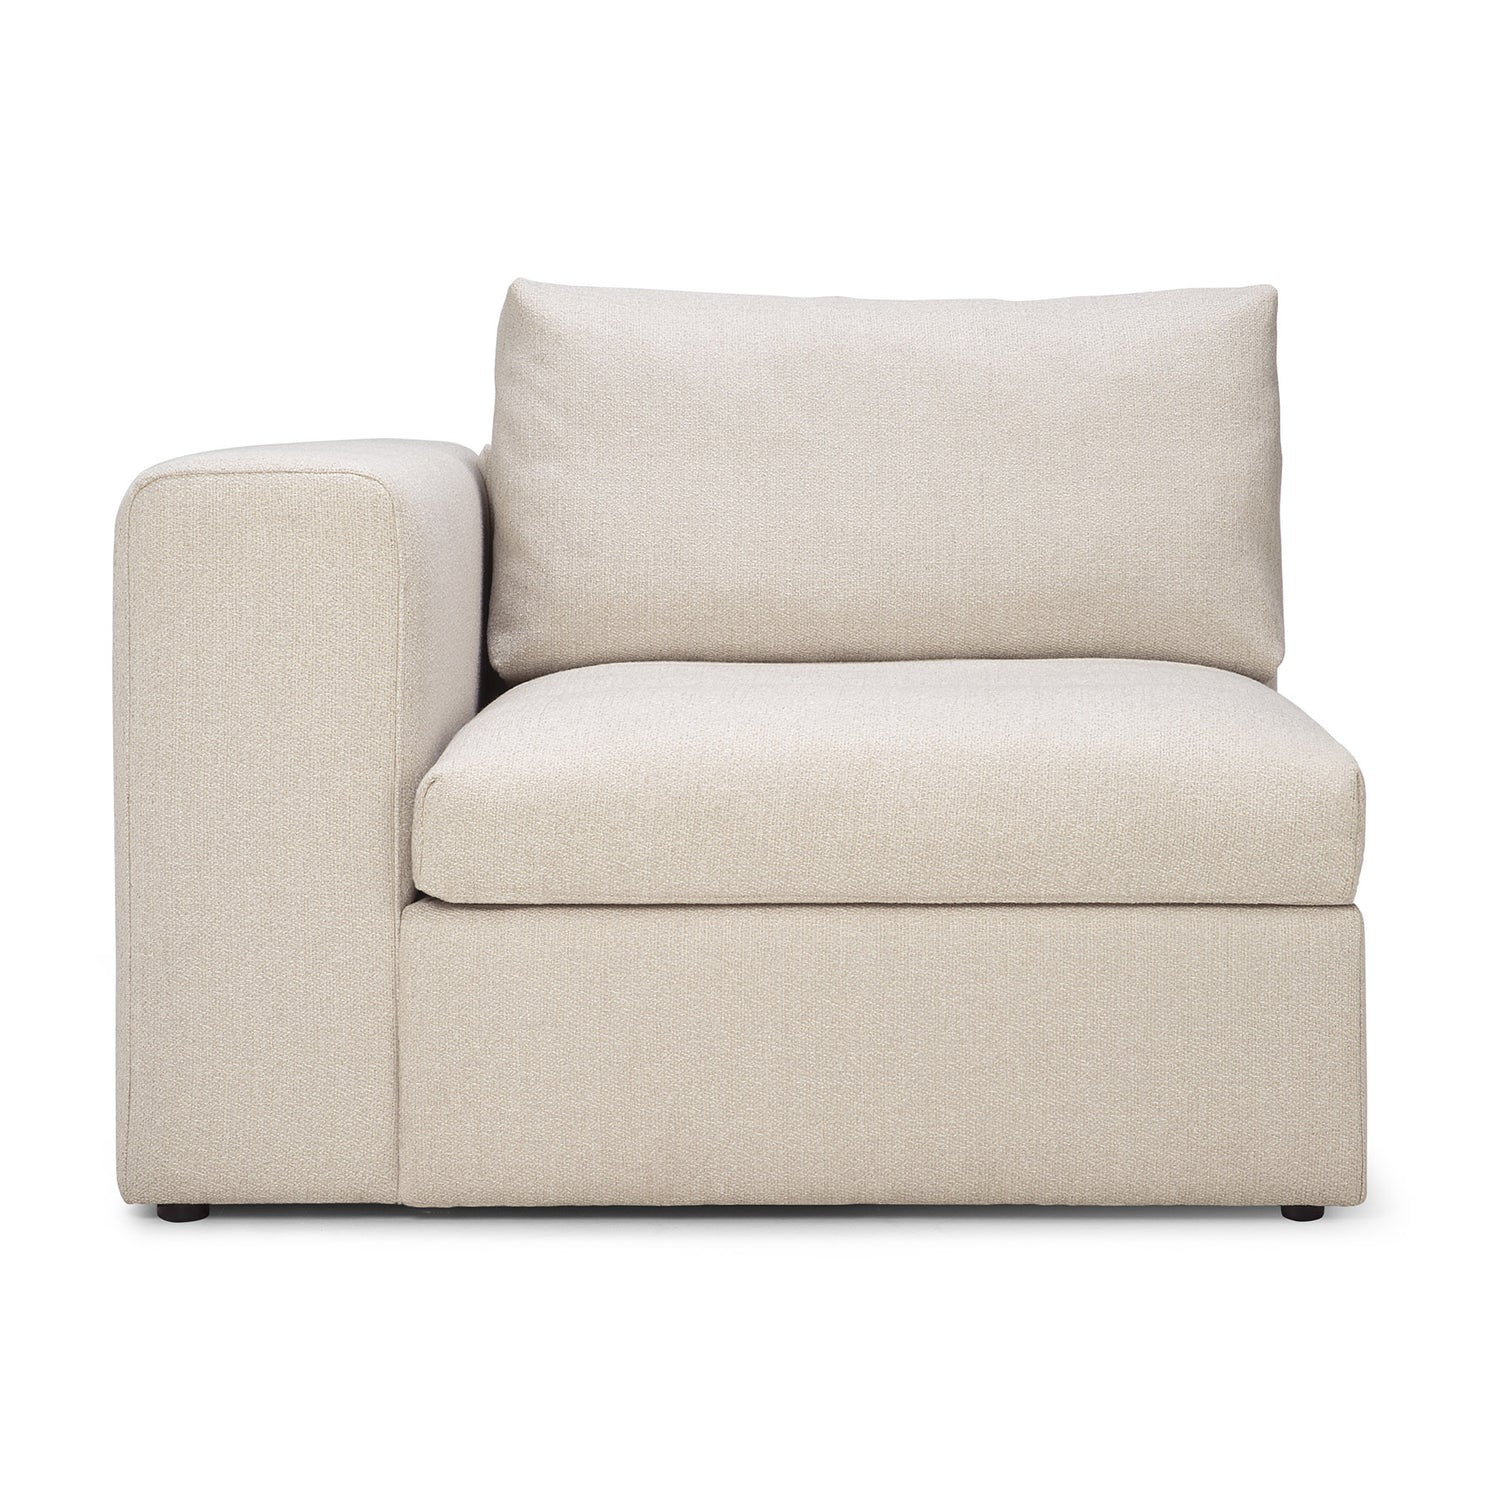 Mellow End Seater With Right Arm Eco Fabric Sofa, Off White